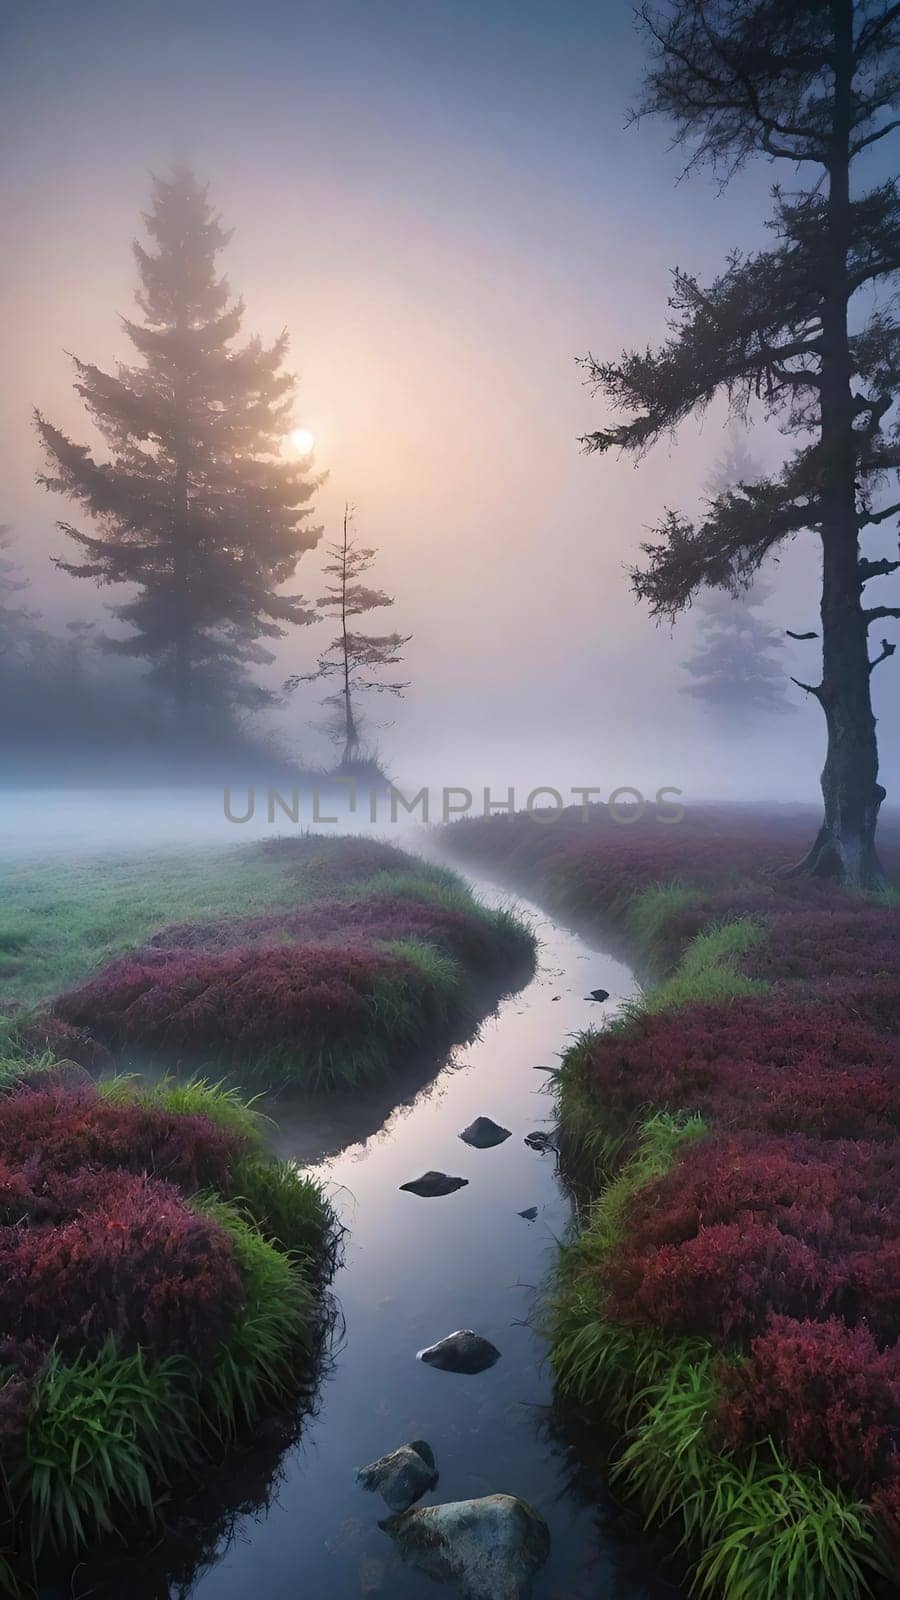 Beautiful landscape image of a misty sunrise over a tree in the countryside.Sunrise in a misty forest in the autumn.Foggy misty forest in the morning.A misty sunrise over a stream flowing through a forest in autumn.